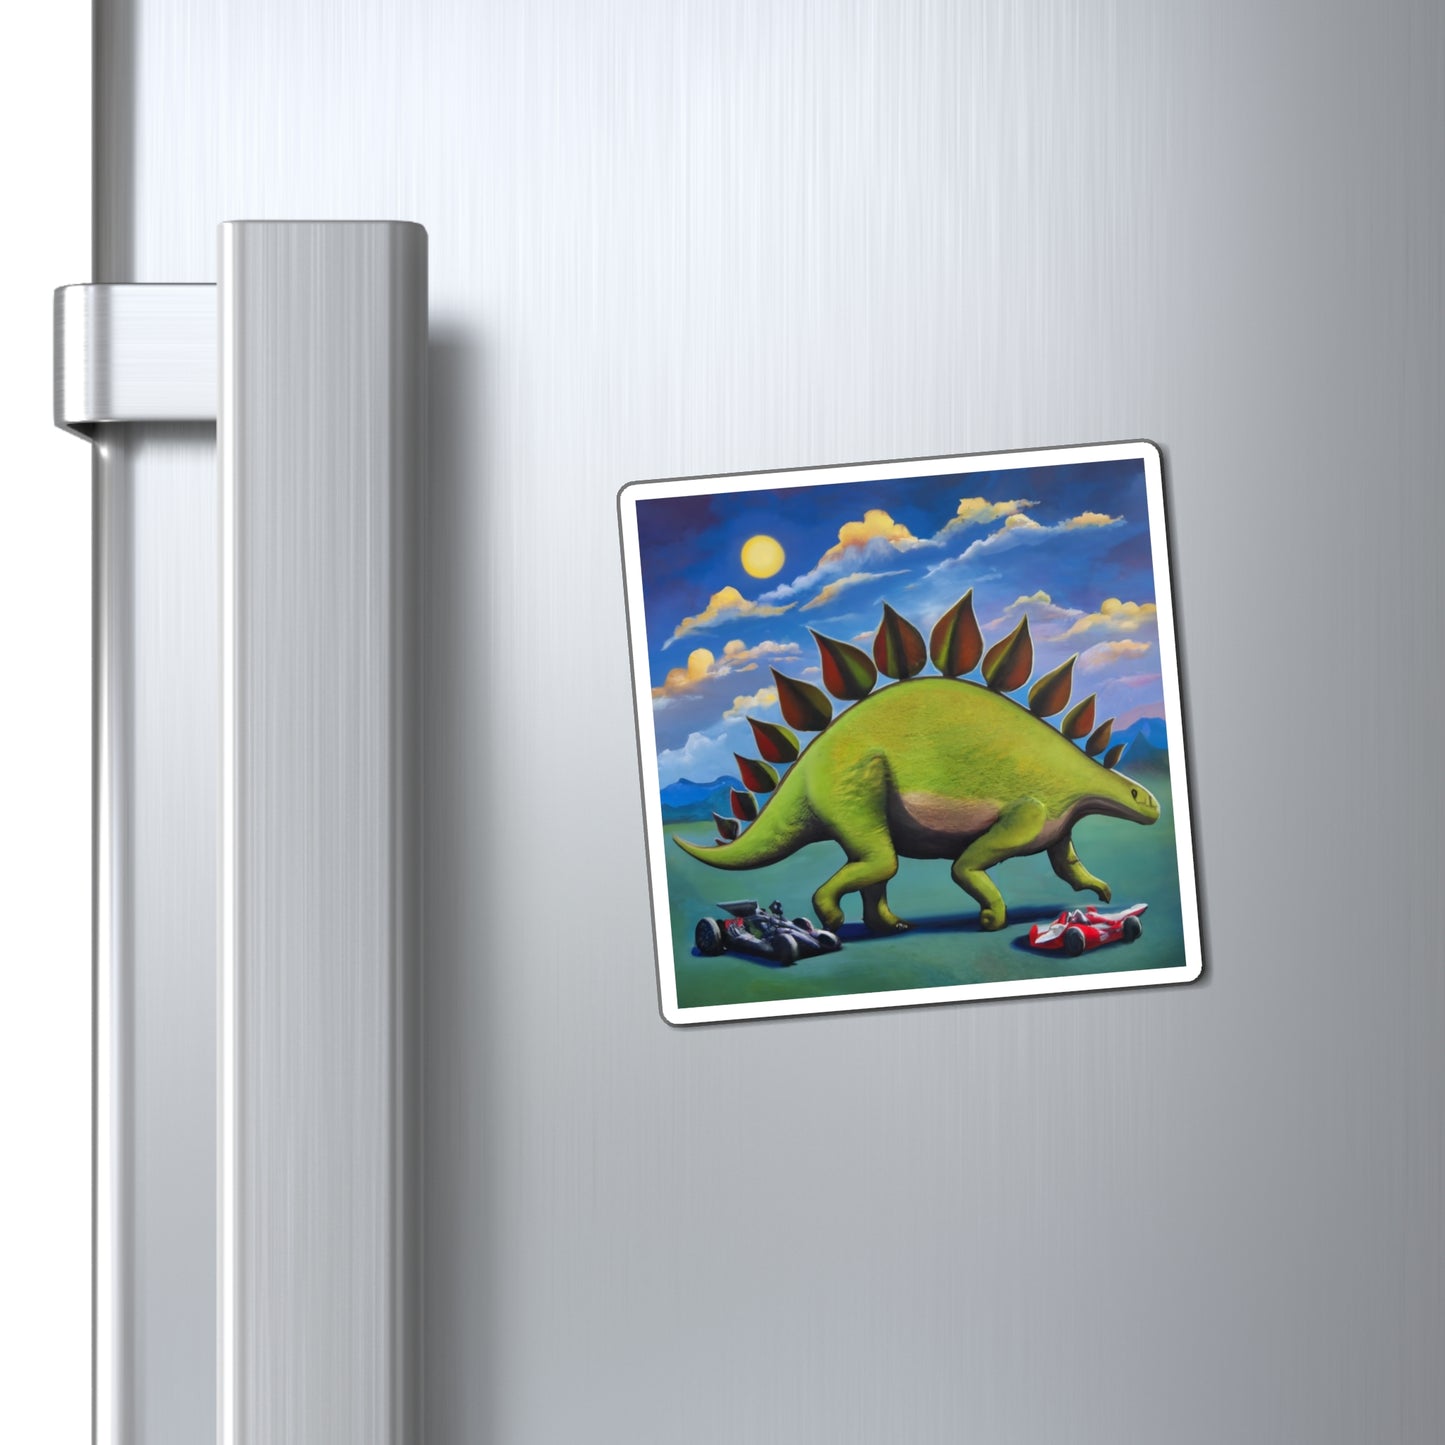 Stegosaurus Meets Indy Cars: Abstract Dino Magnet